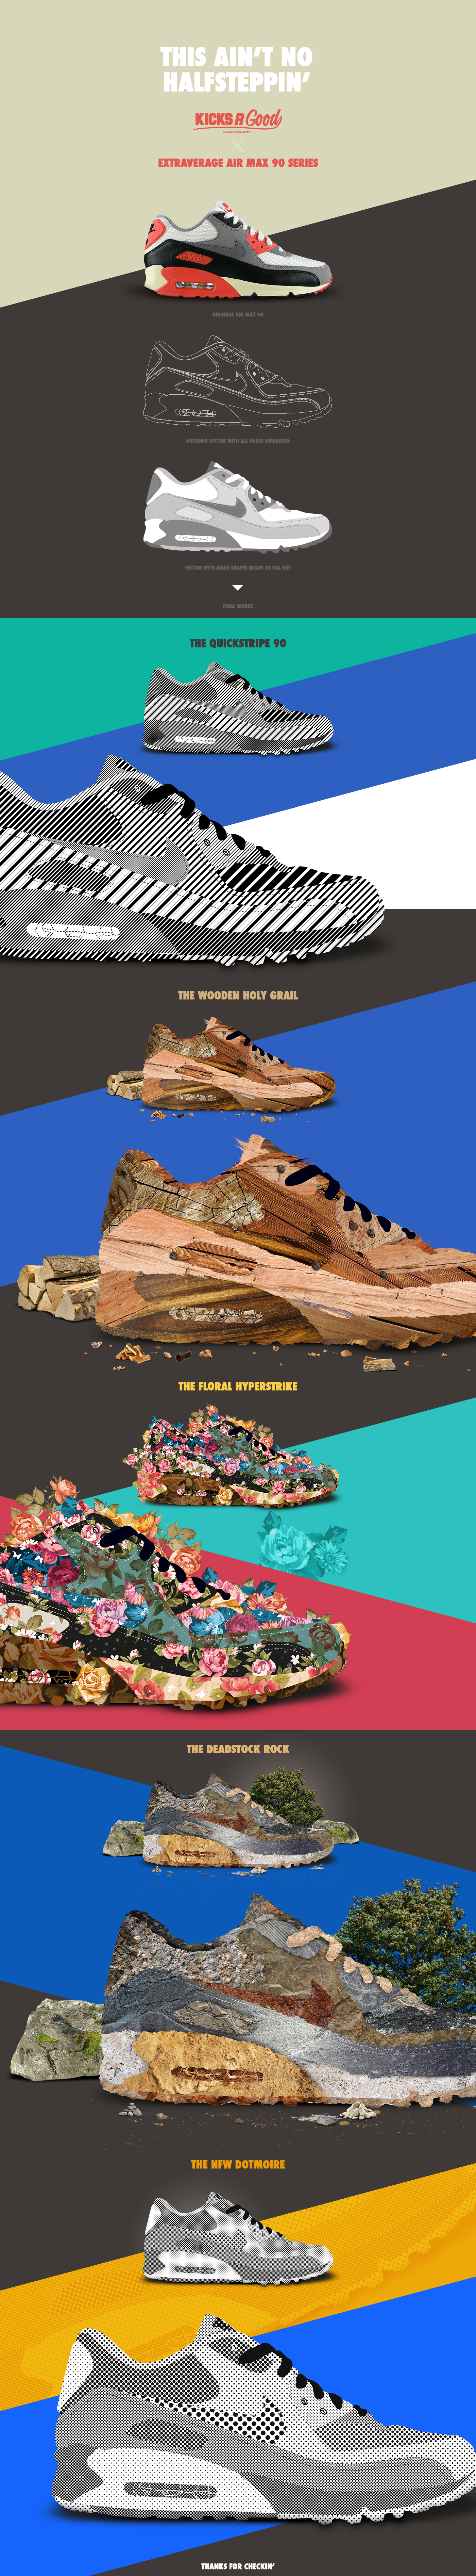 kicks sneakers shoes airmax Nike Exhibition  pattern AM90 photoshop Mockup vector expo